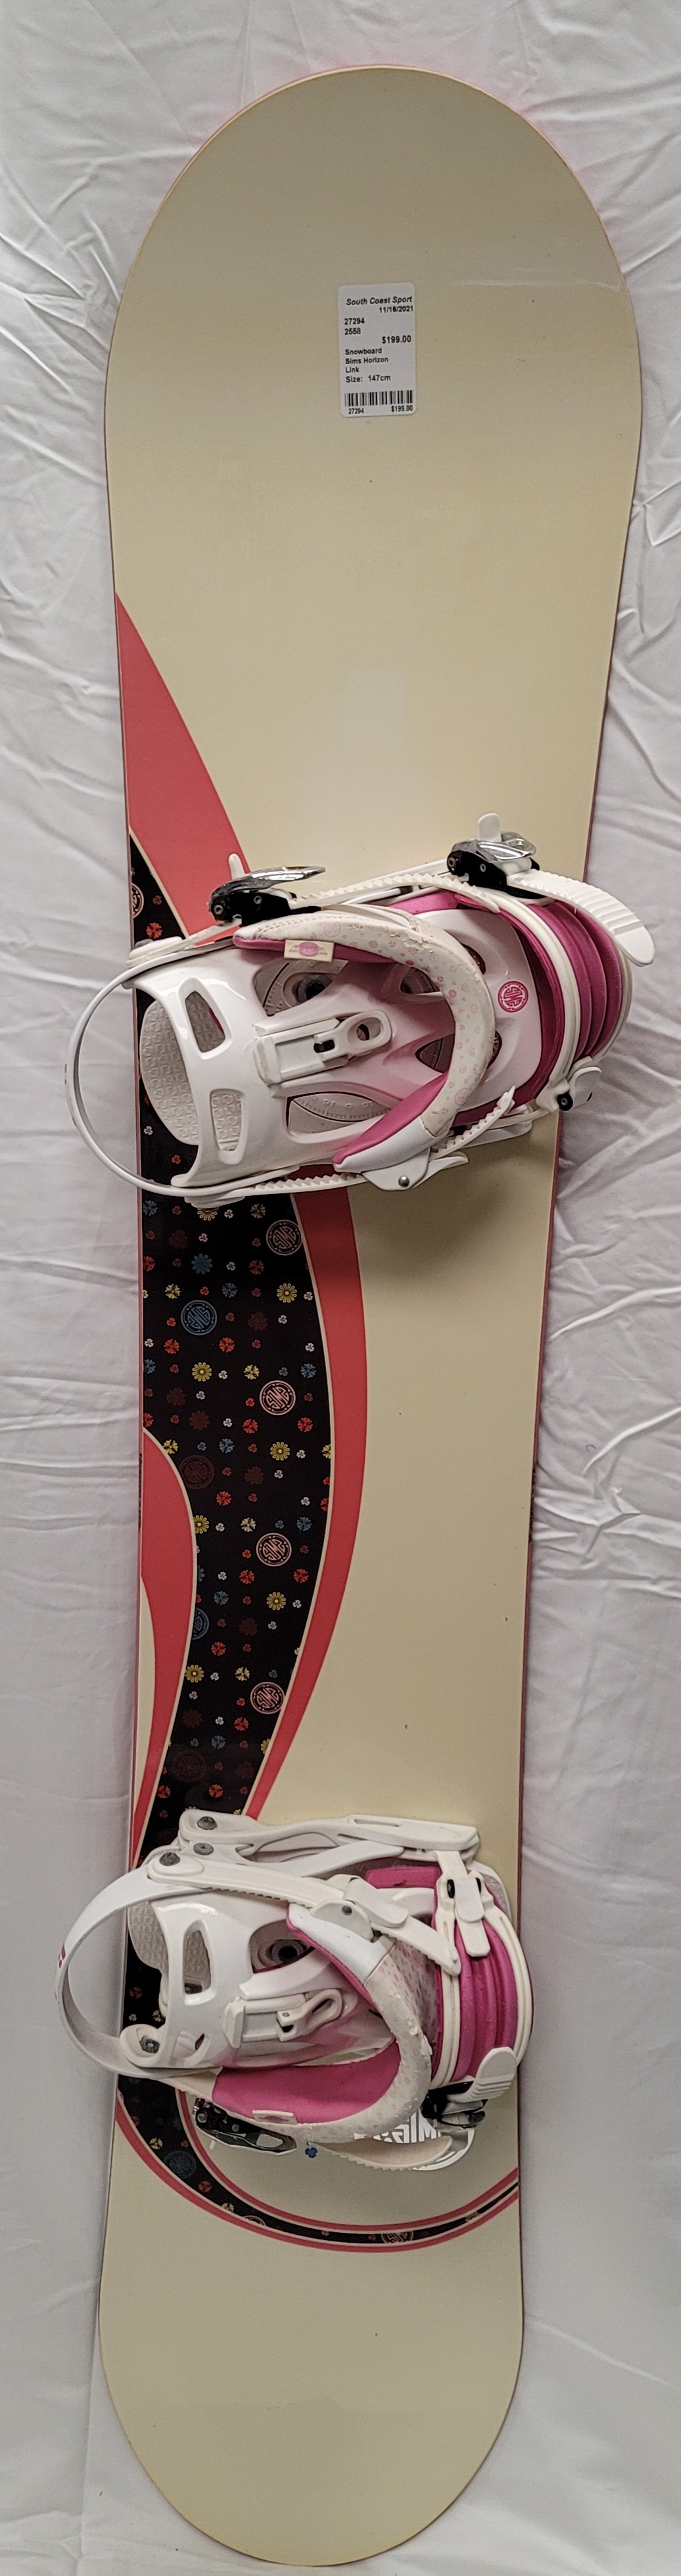 Sims Horizon snowboard with Link bindings, Size: 147cm